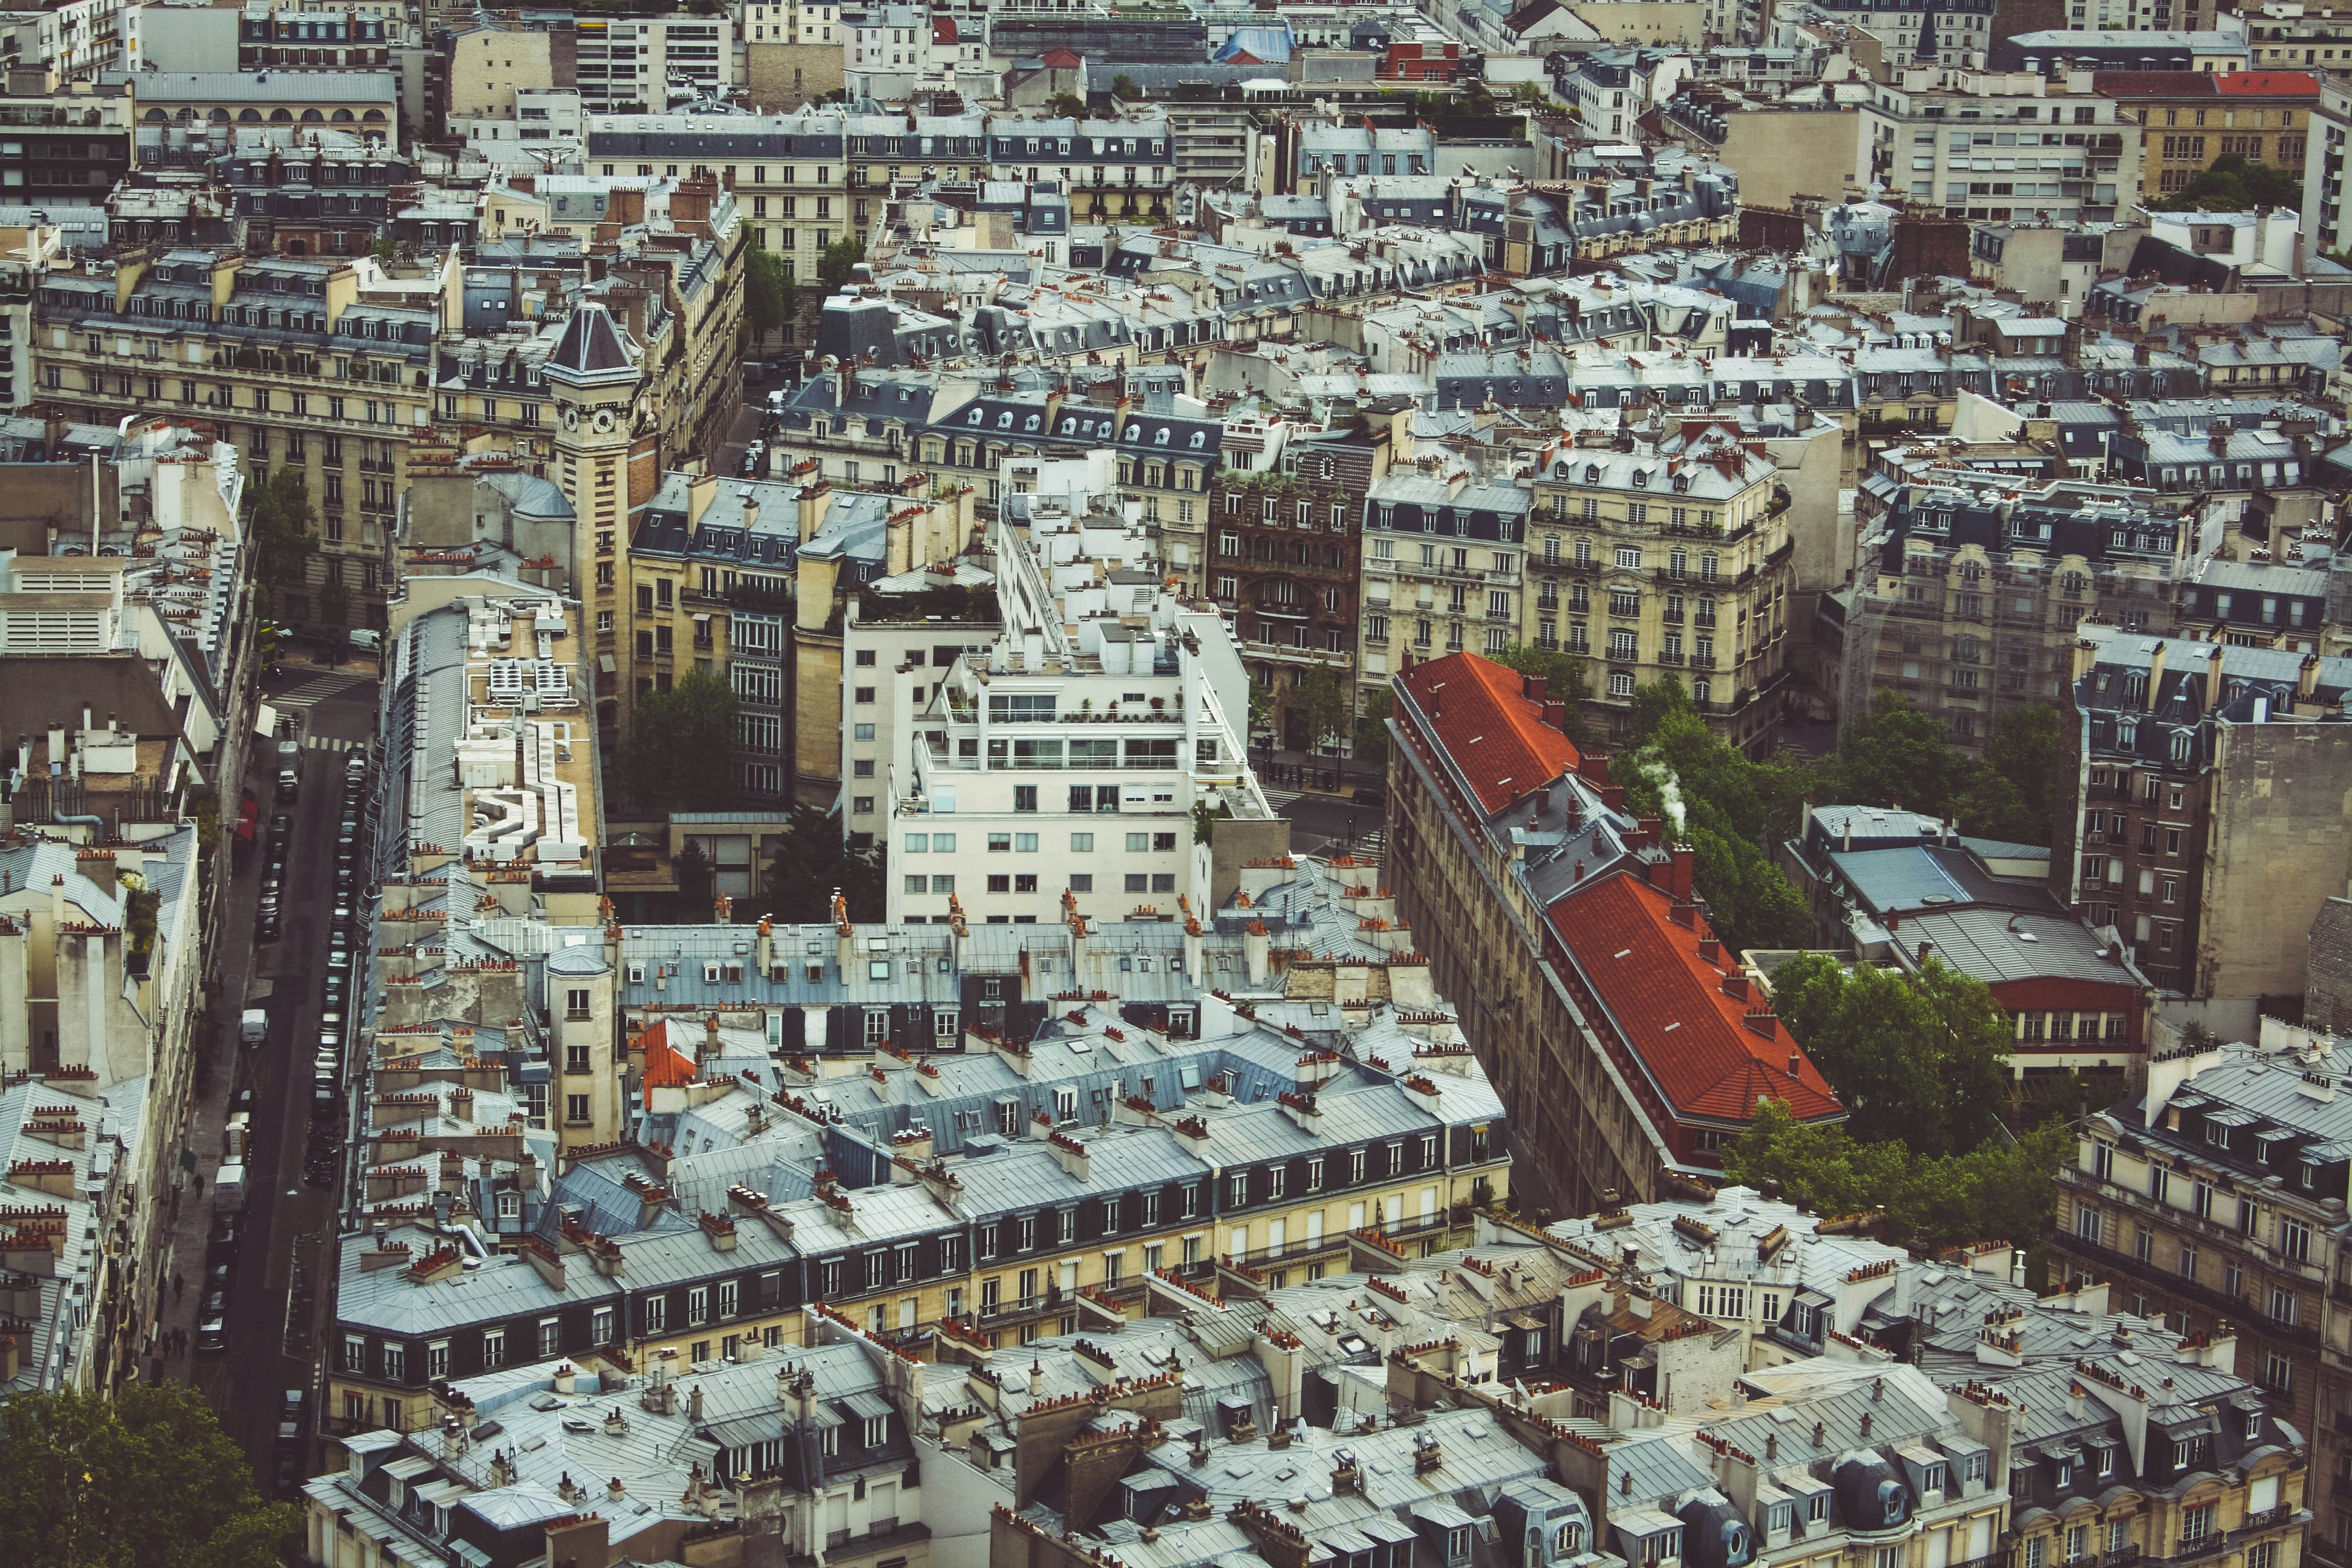 Paris buildings and streets